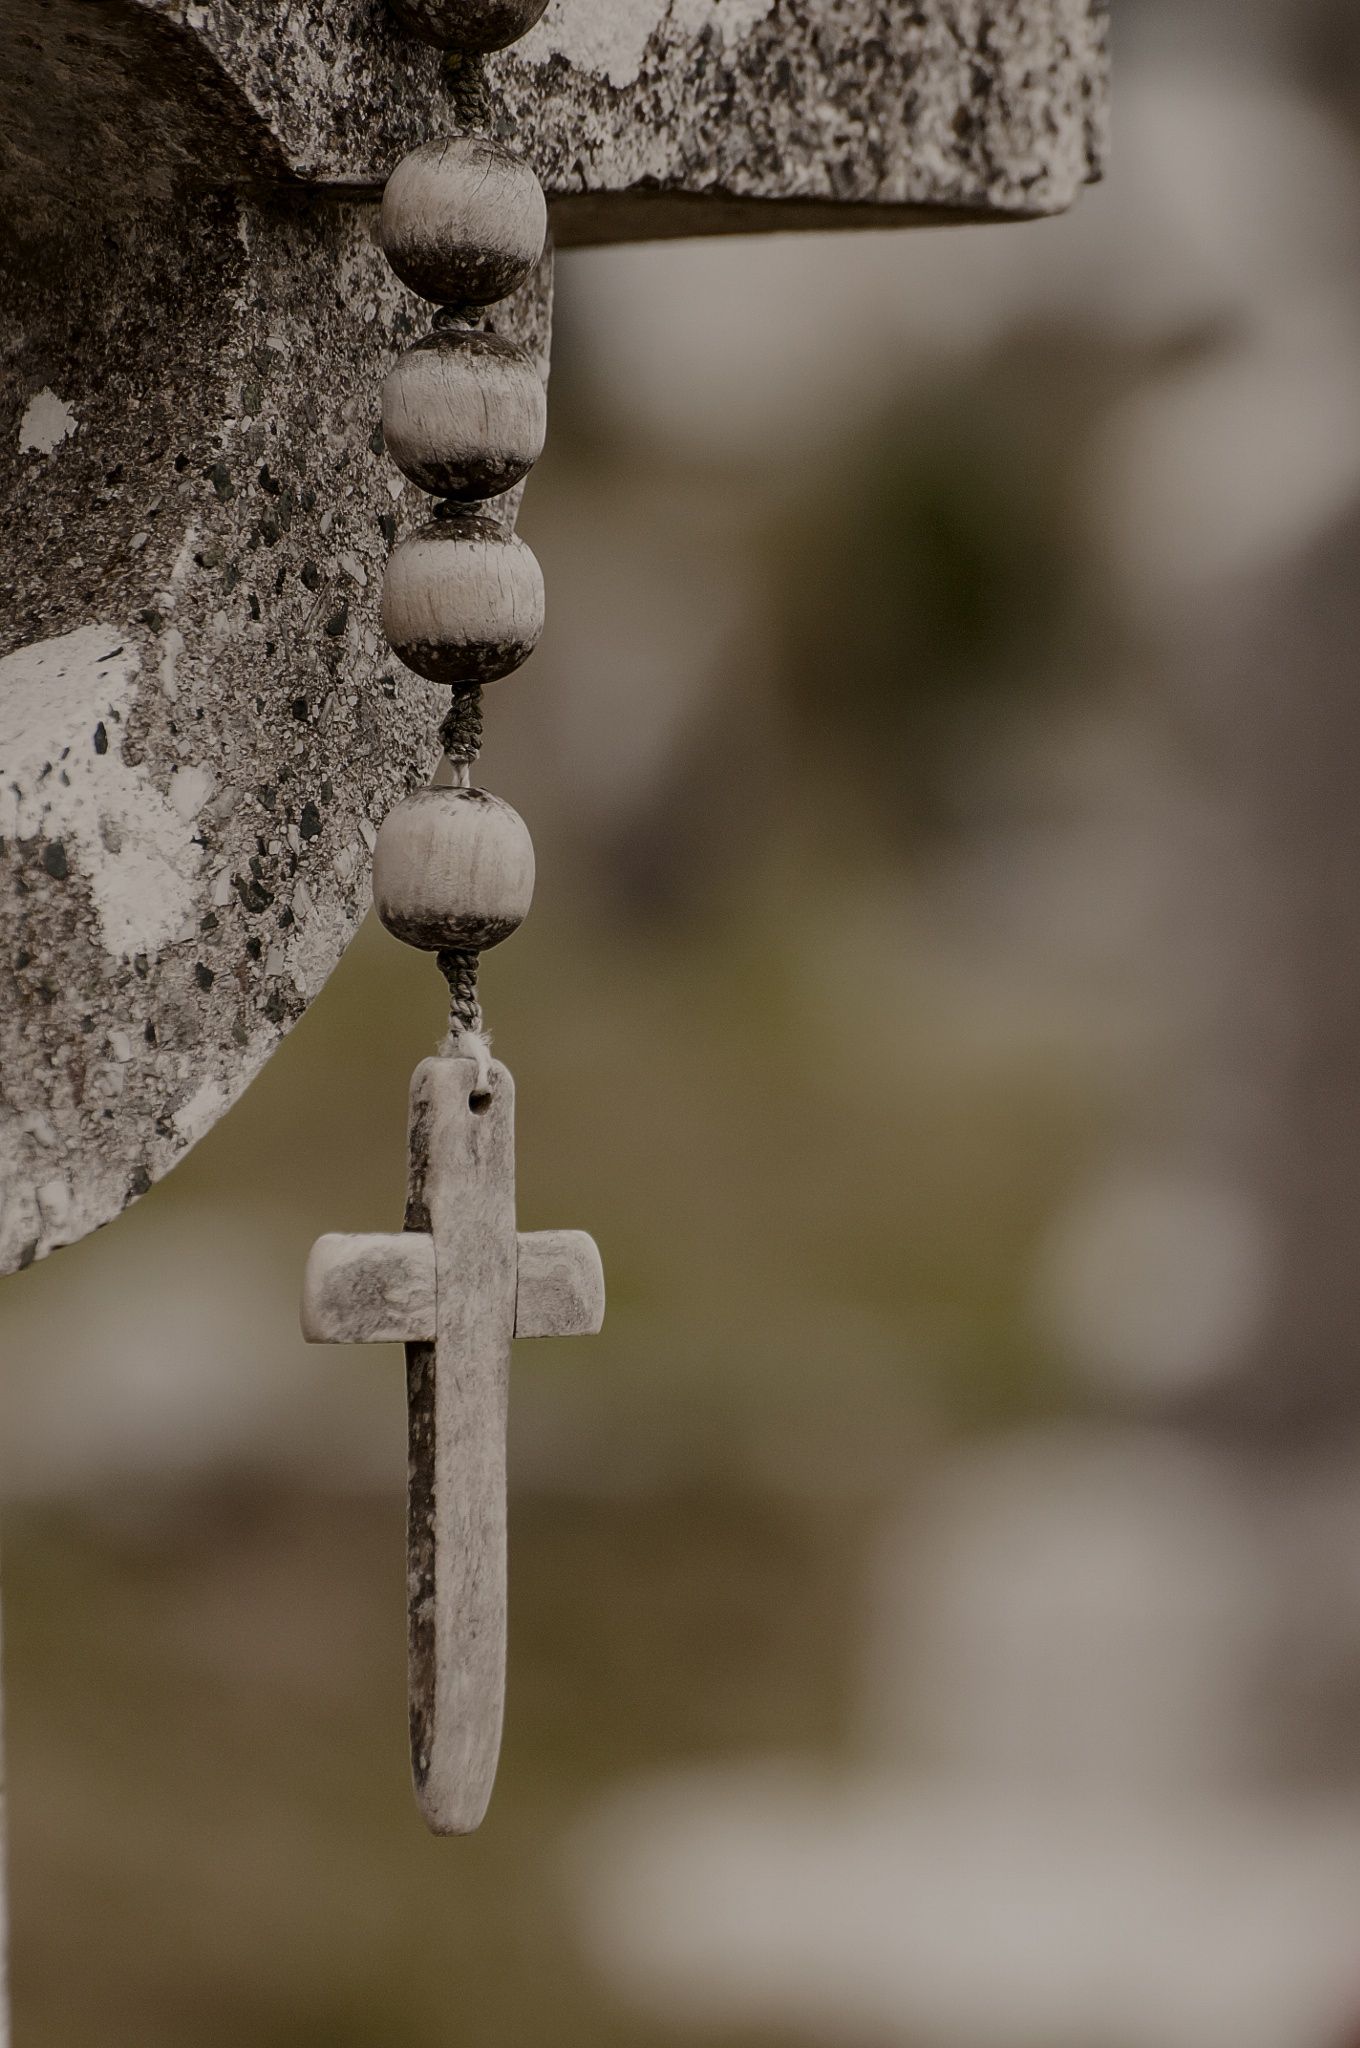 Rosary Beads and cross by Eddie Guiry on 500px. Rosary beads